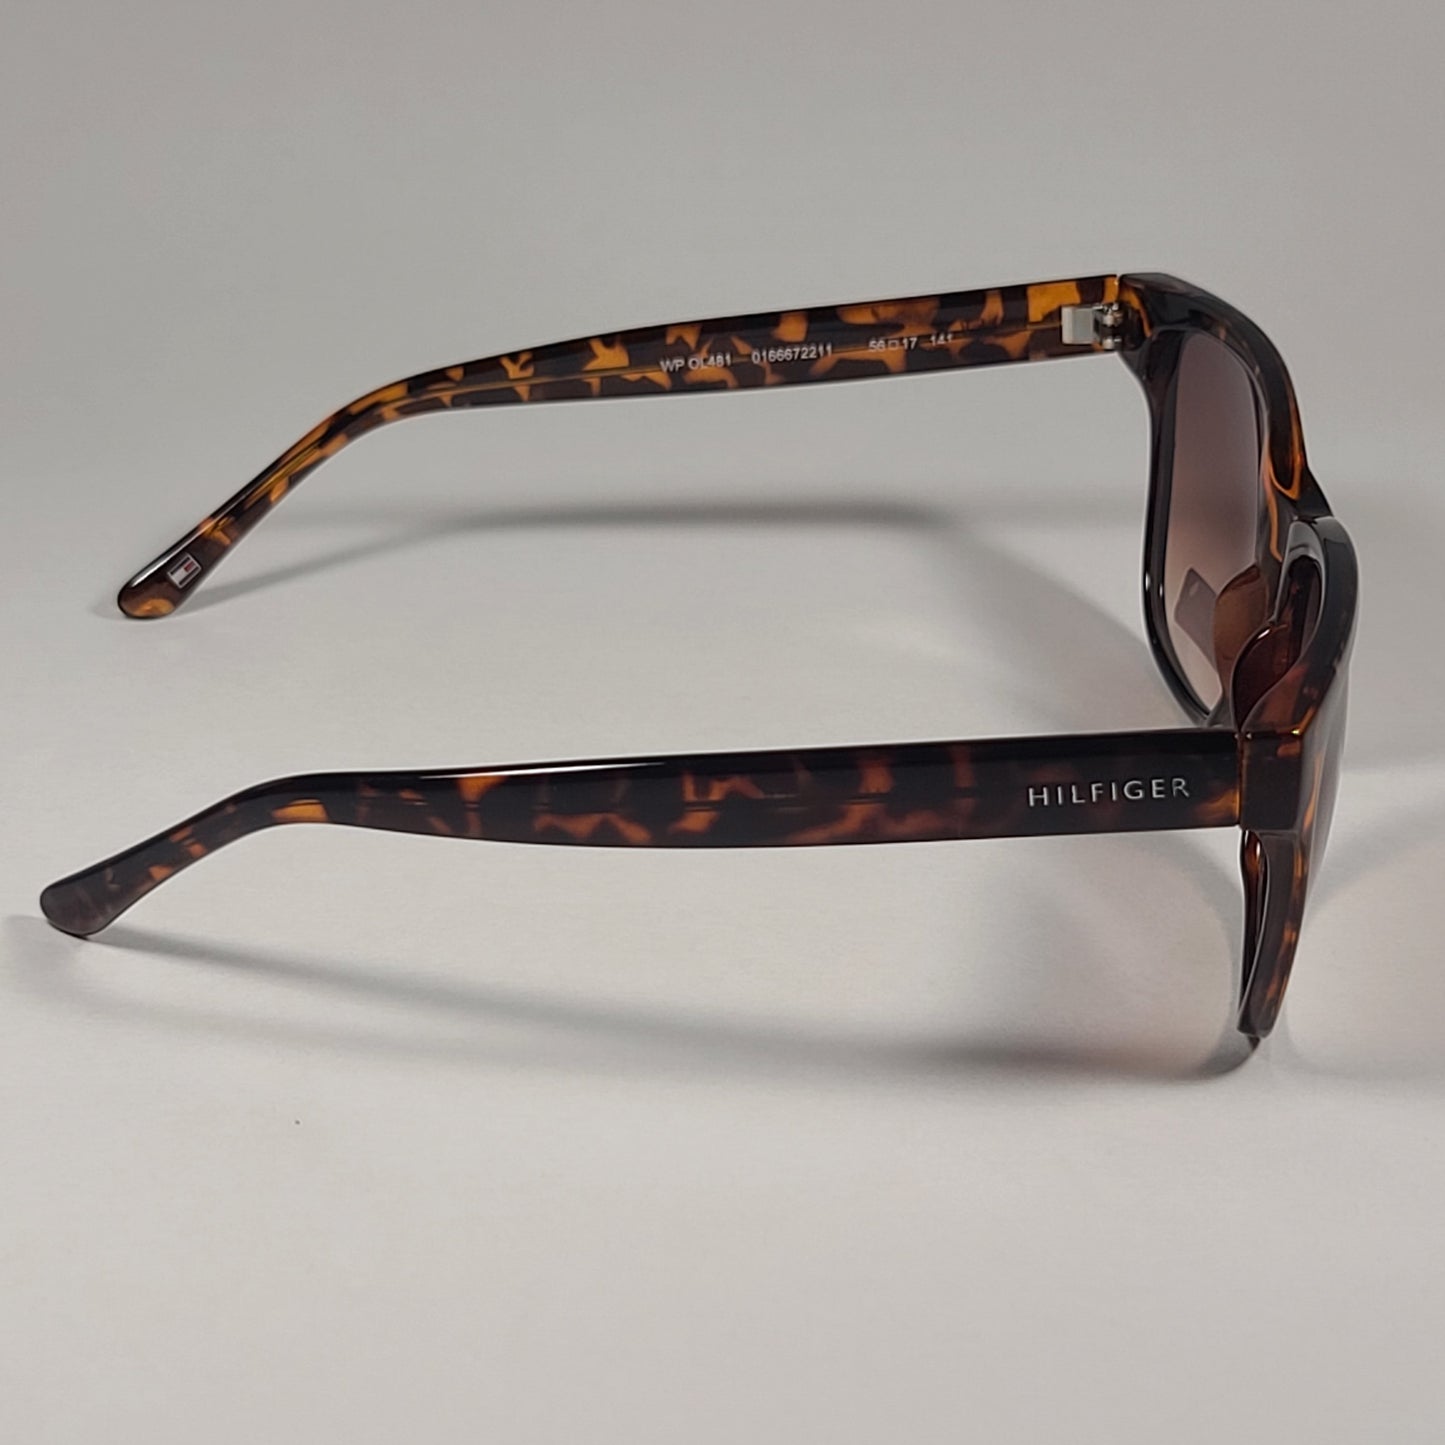 Tommy Hilfiger Lilly Square Sunglasses Brown Tortoise Frame Brown Gradient Lens LILLY WP OL481 - Sunglasses